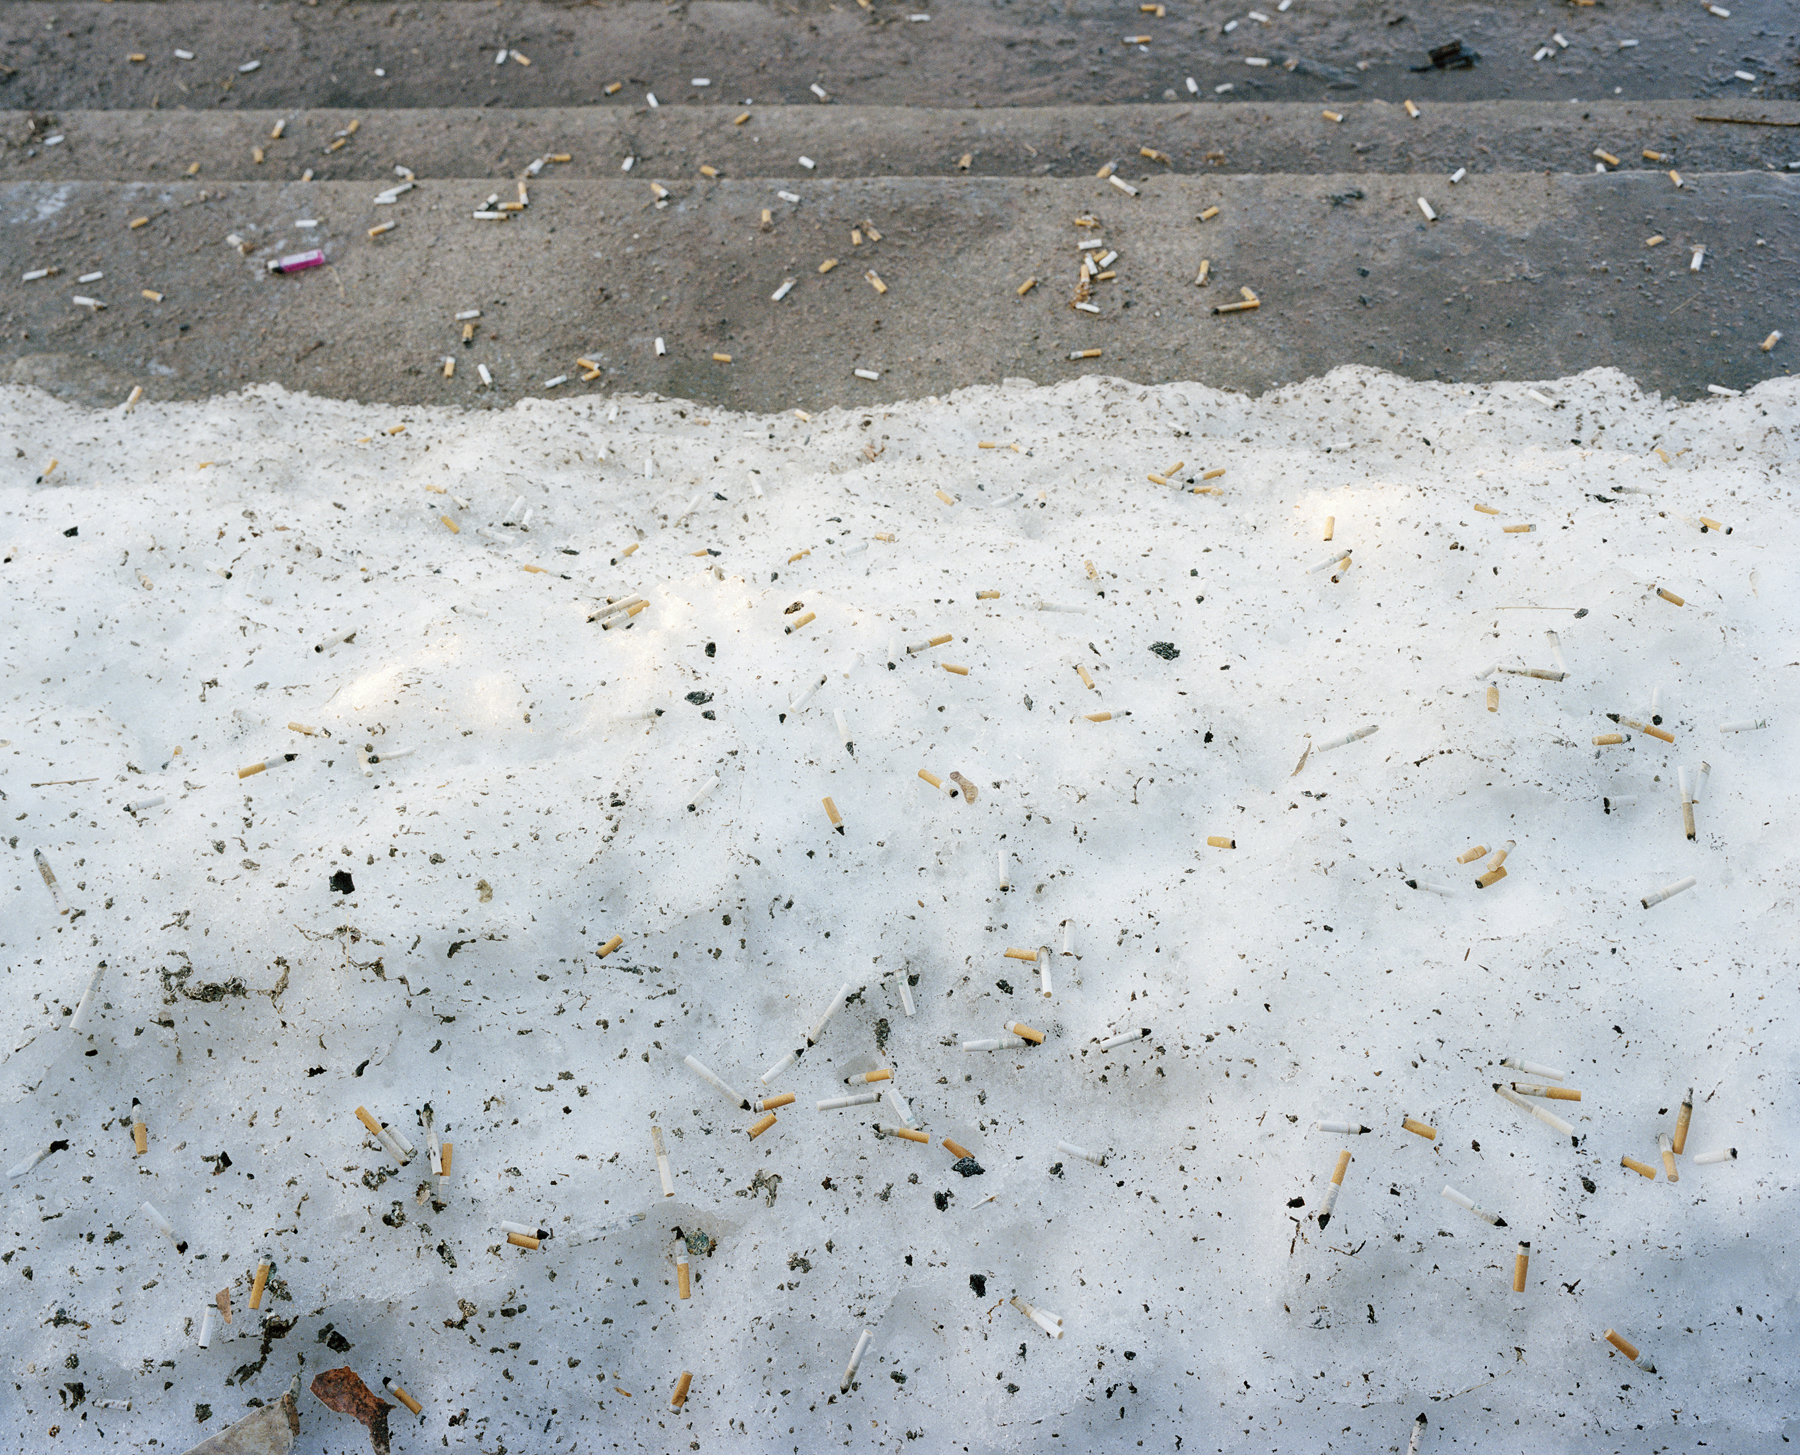    Cigarette Butts on Sunday Morning, Cleveland, NY.   , 2007    Ink jet print, edition of 5 + 2AP    16 x 19 inches  